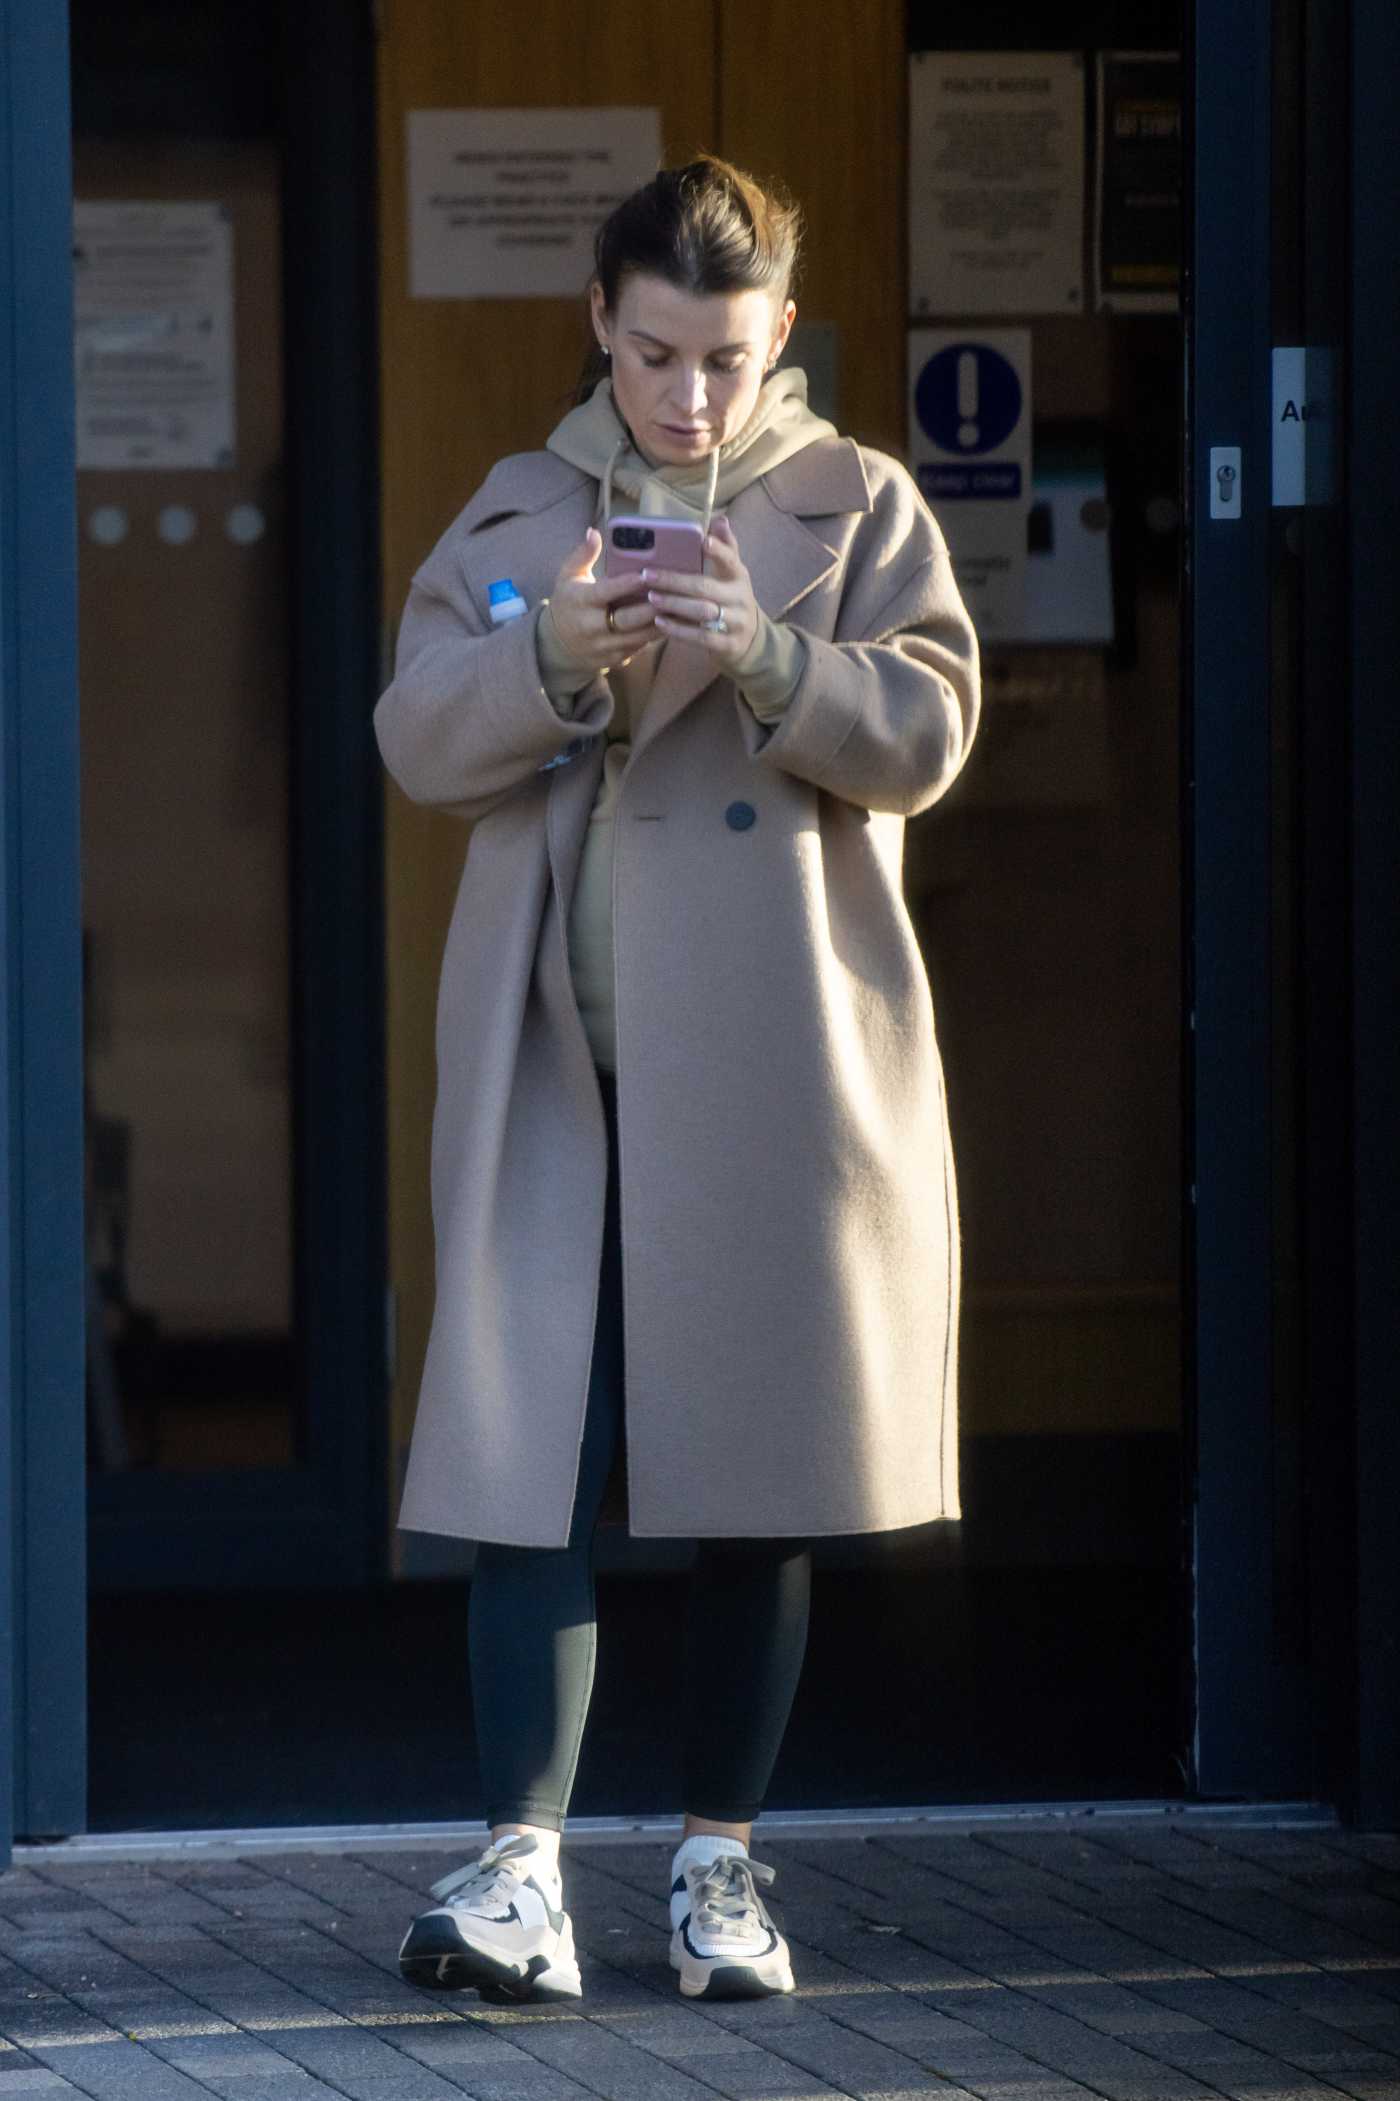 Coleen Rooney in a Beige Coat Leaves a Gym in Manchester 01/31/2022